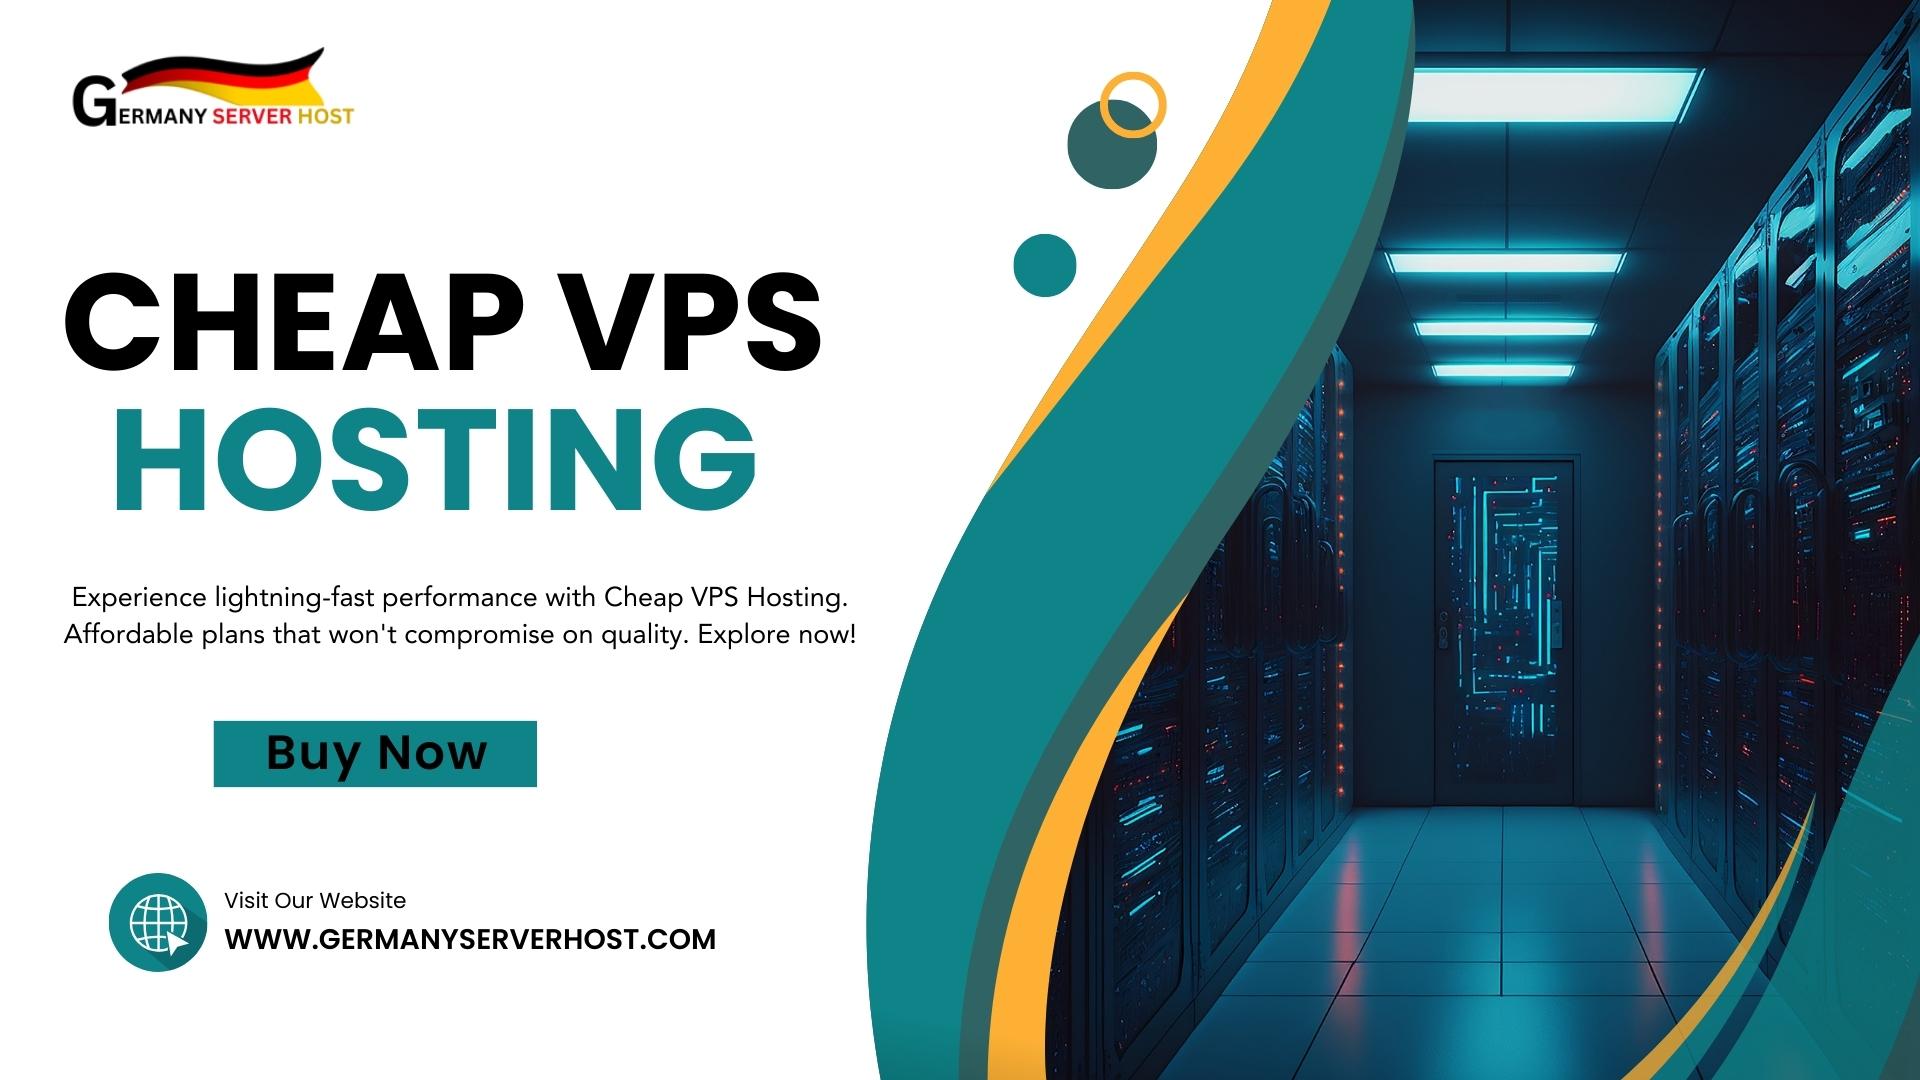 Cheap VPS Hosting: Your Budget-Friendly Solution